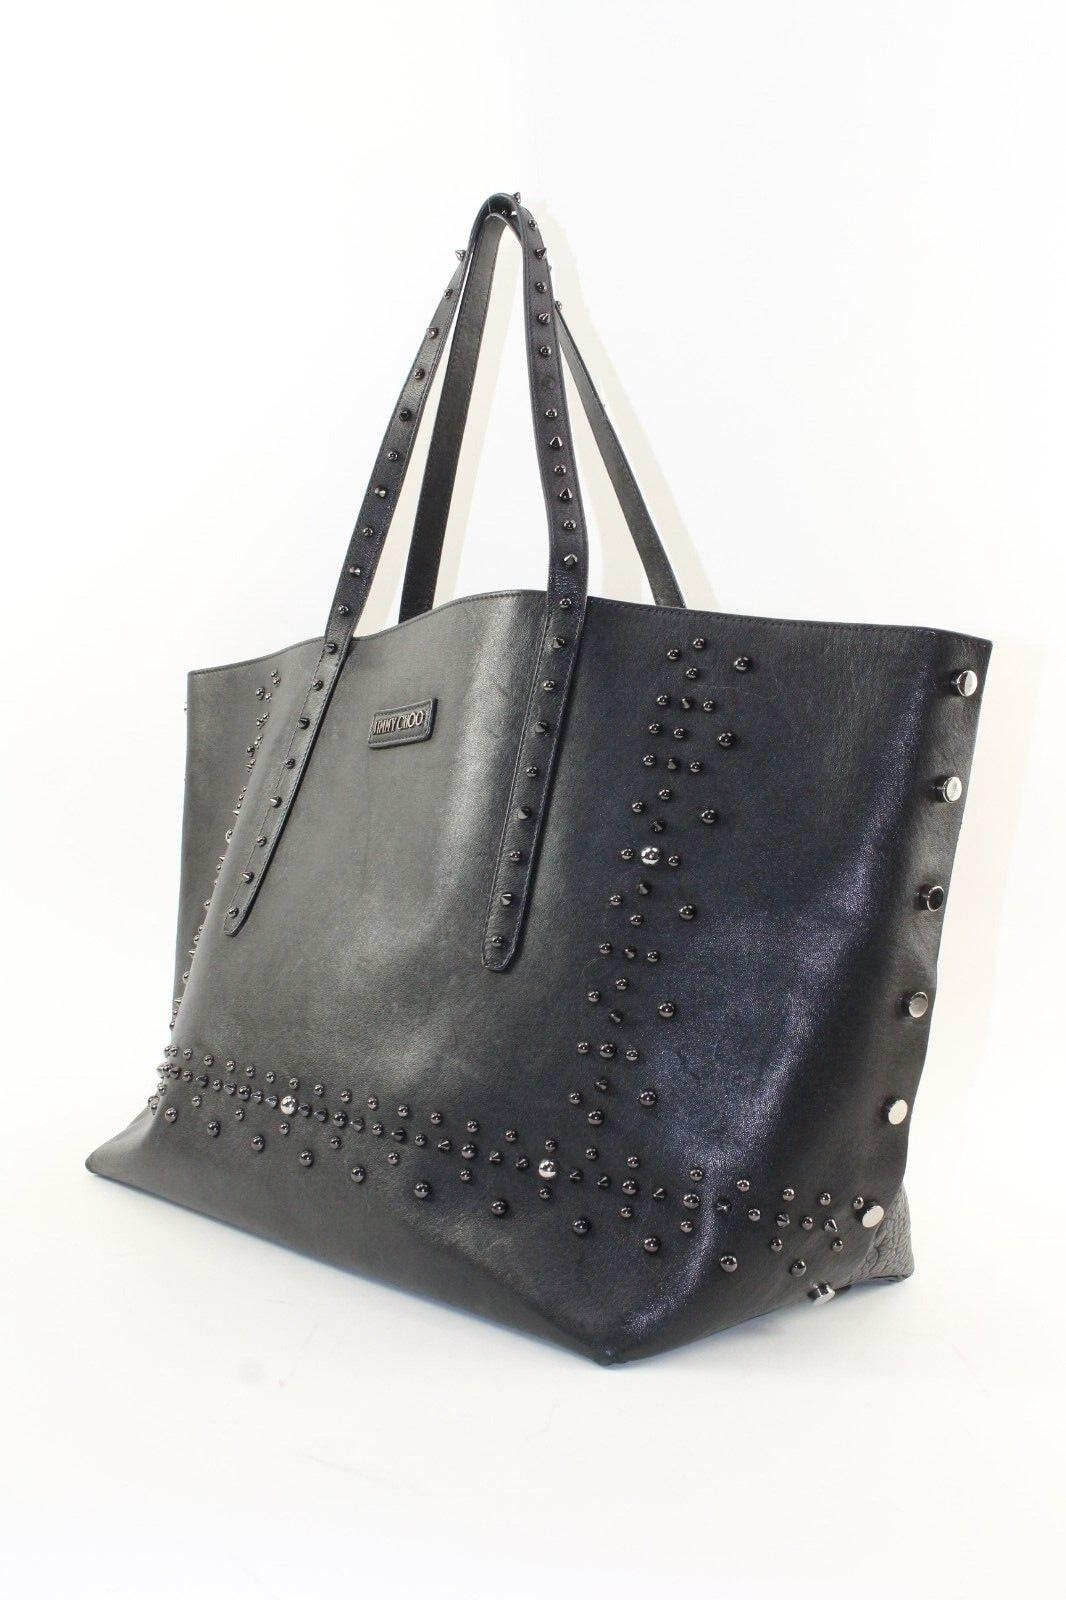 JIMMY CHOO Black Leather Studded Tote Spike Grommet Rivet 4JC1220K
Date Code/Serial Number: W6TZ4X

Made In: Italy

Measurements: Length: 16 